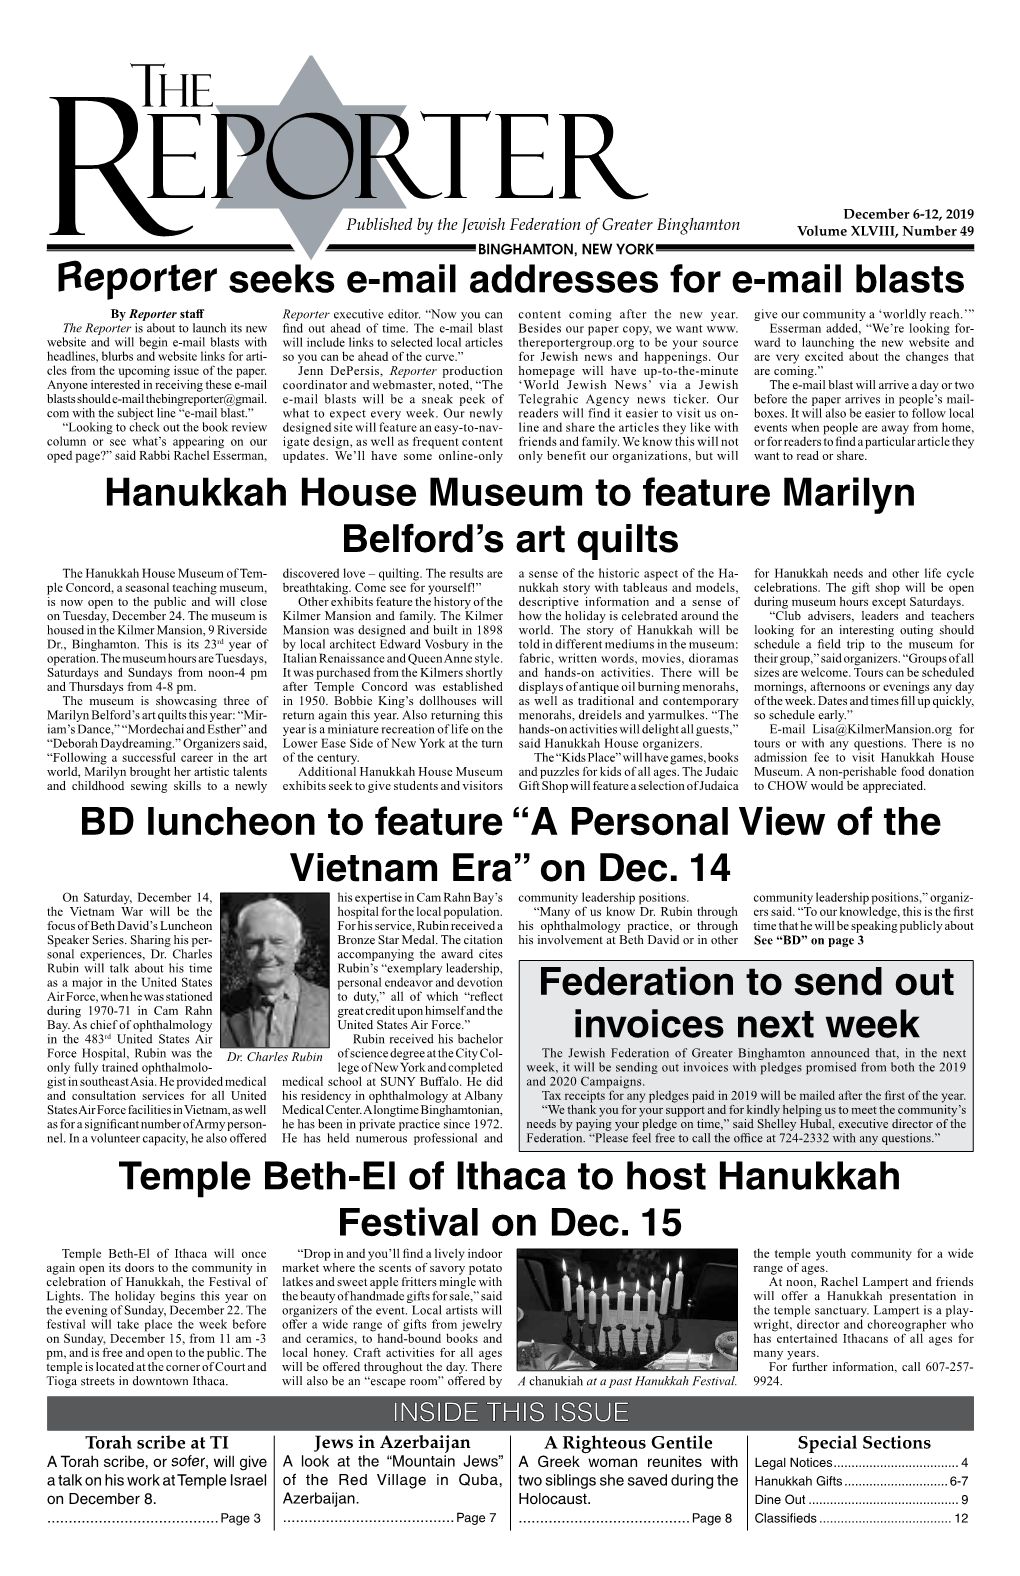 Reporter Seeks E-Mail Addresses for E-Mail Blasts Temple Beth-El Of